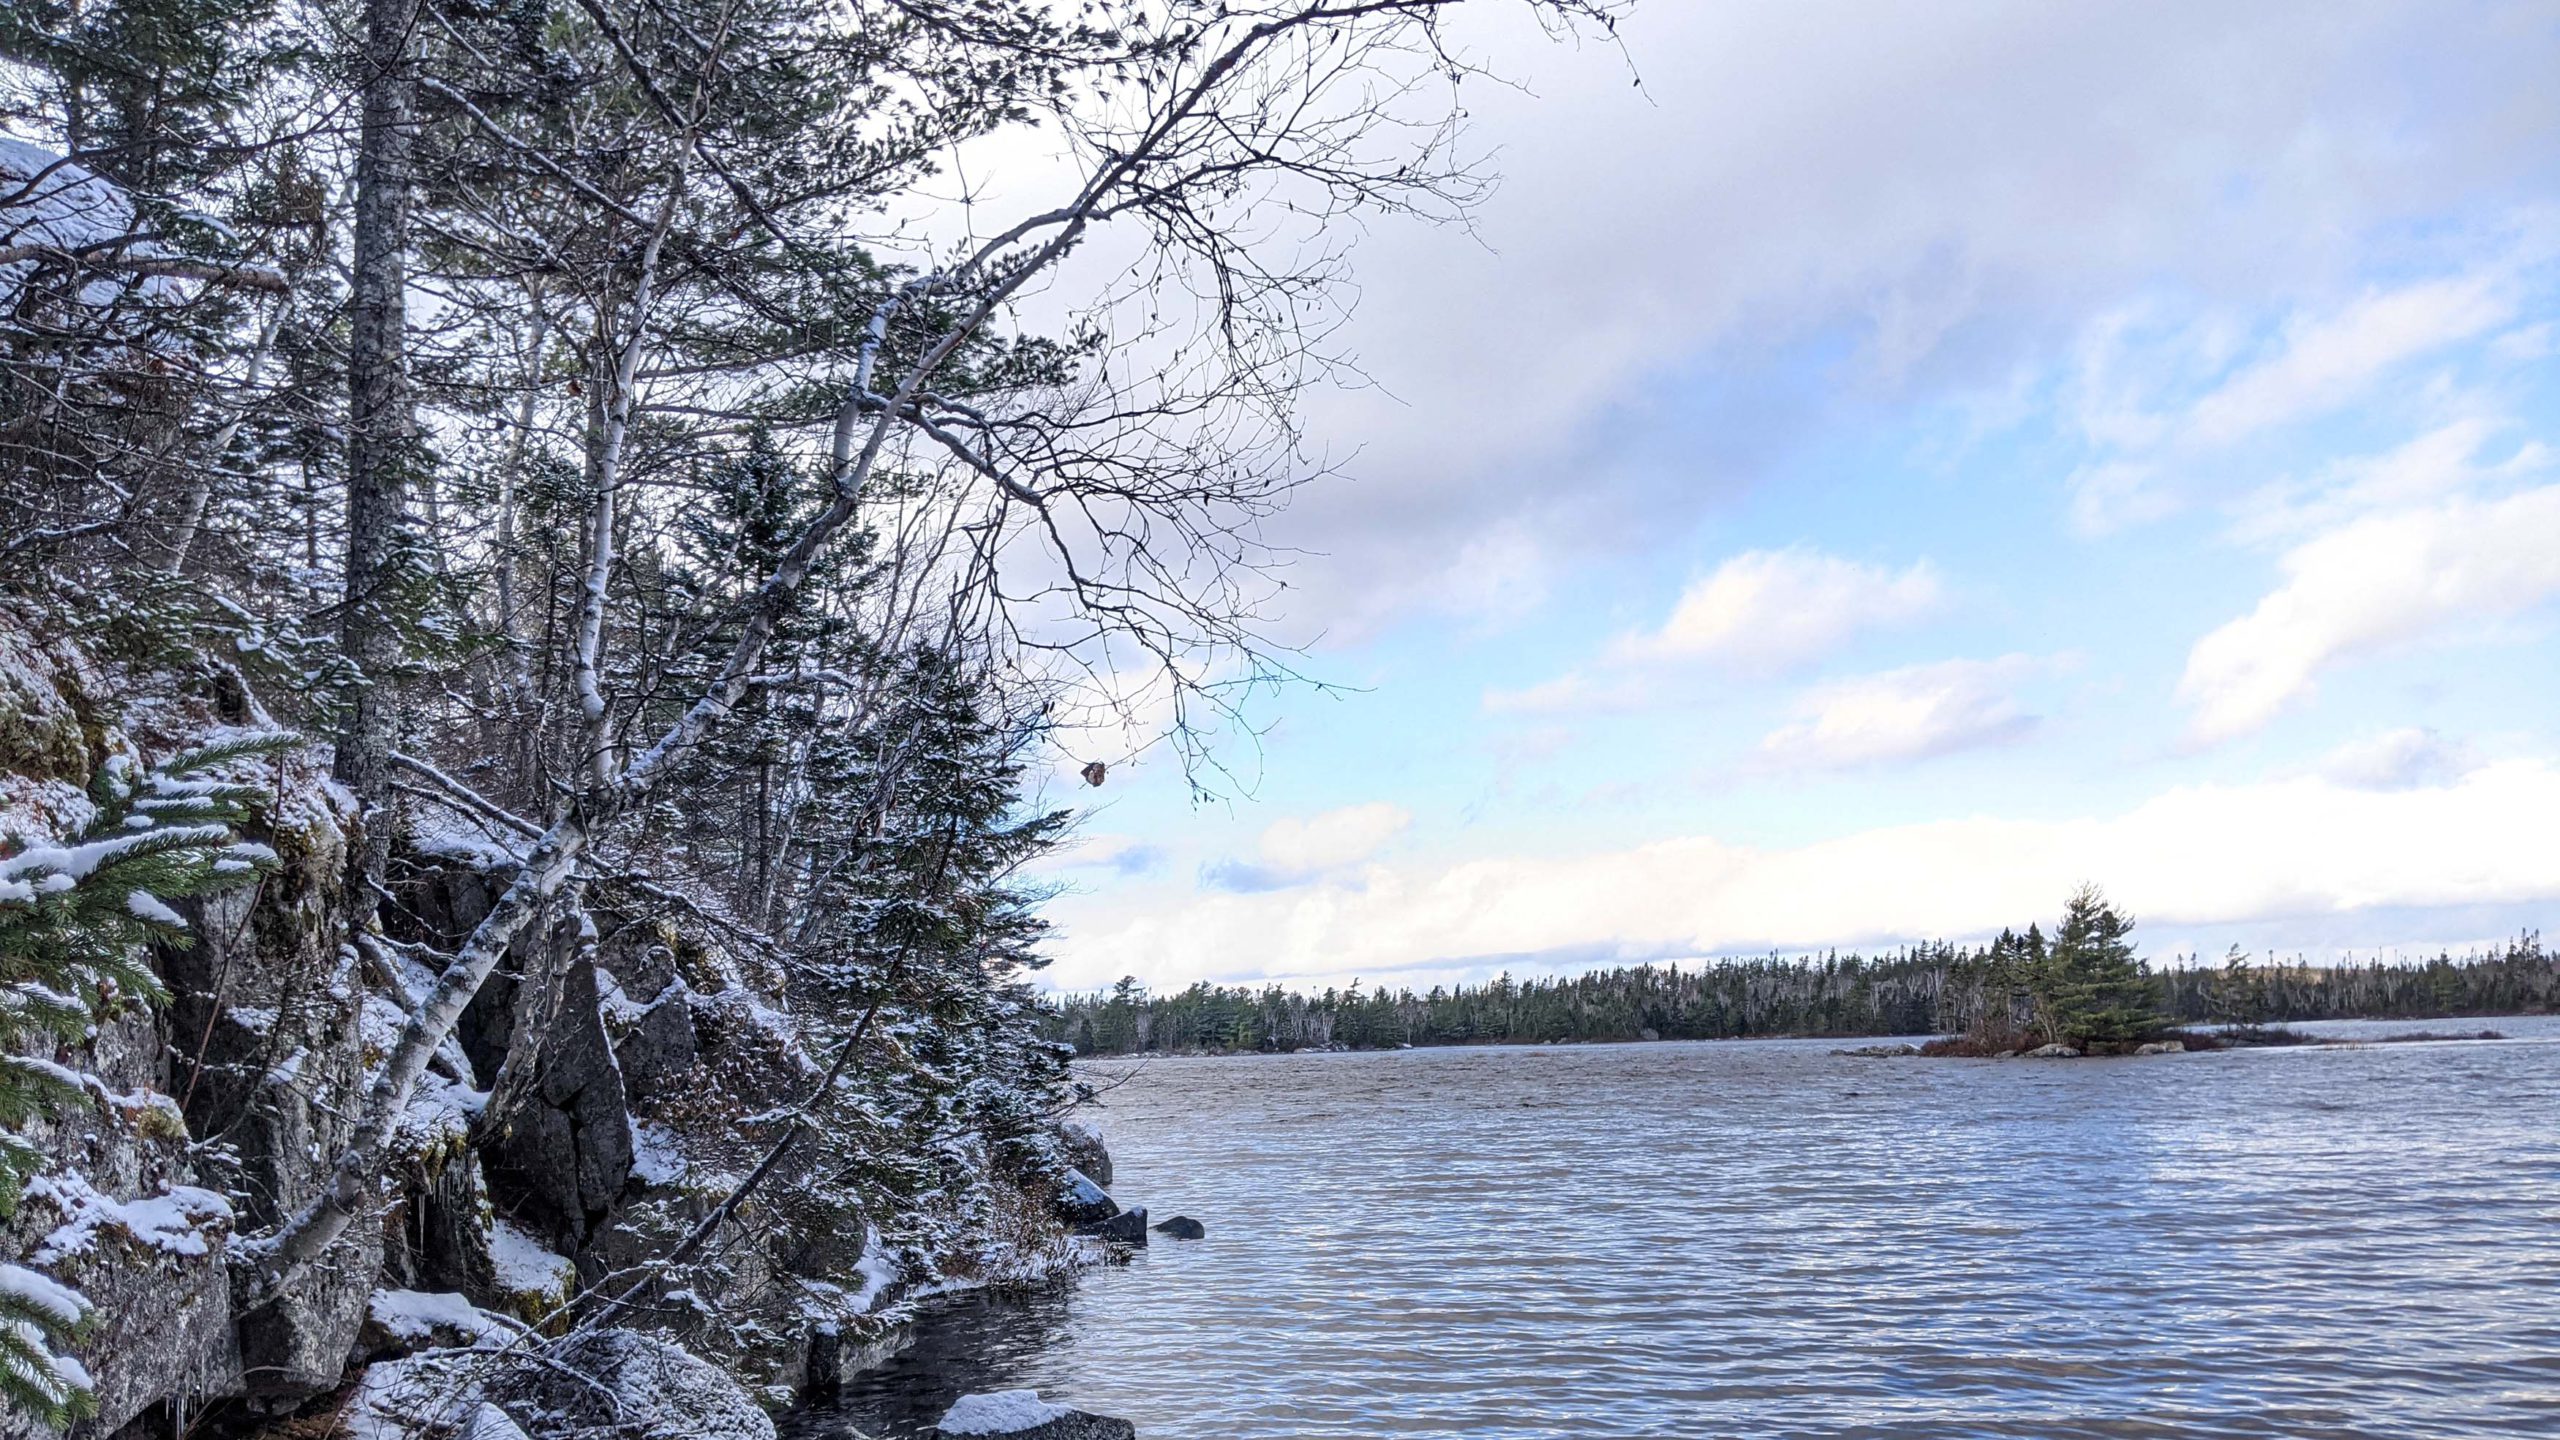 A row of trees, bushes, and rocks covered with a light layer of snow juts out into a lake from the left.